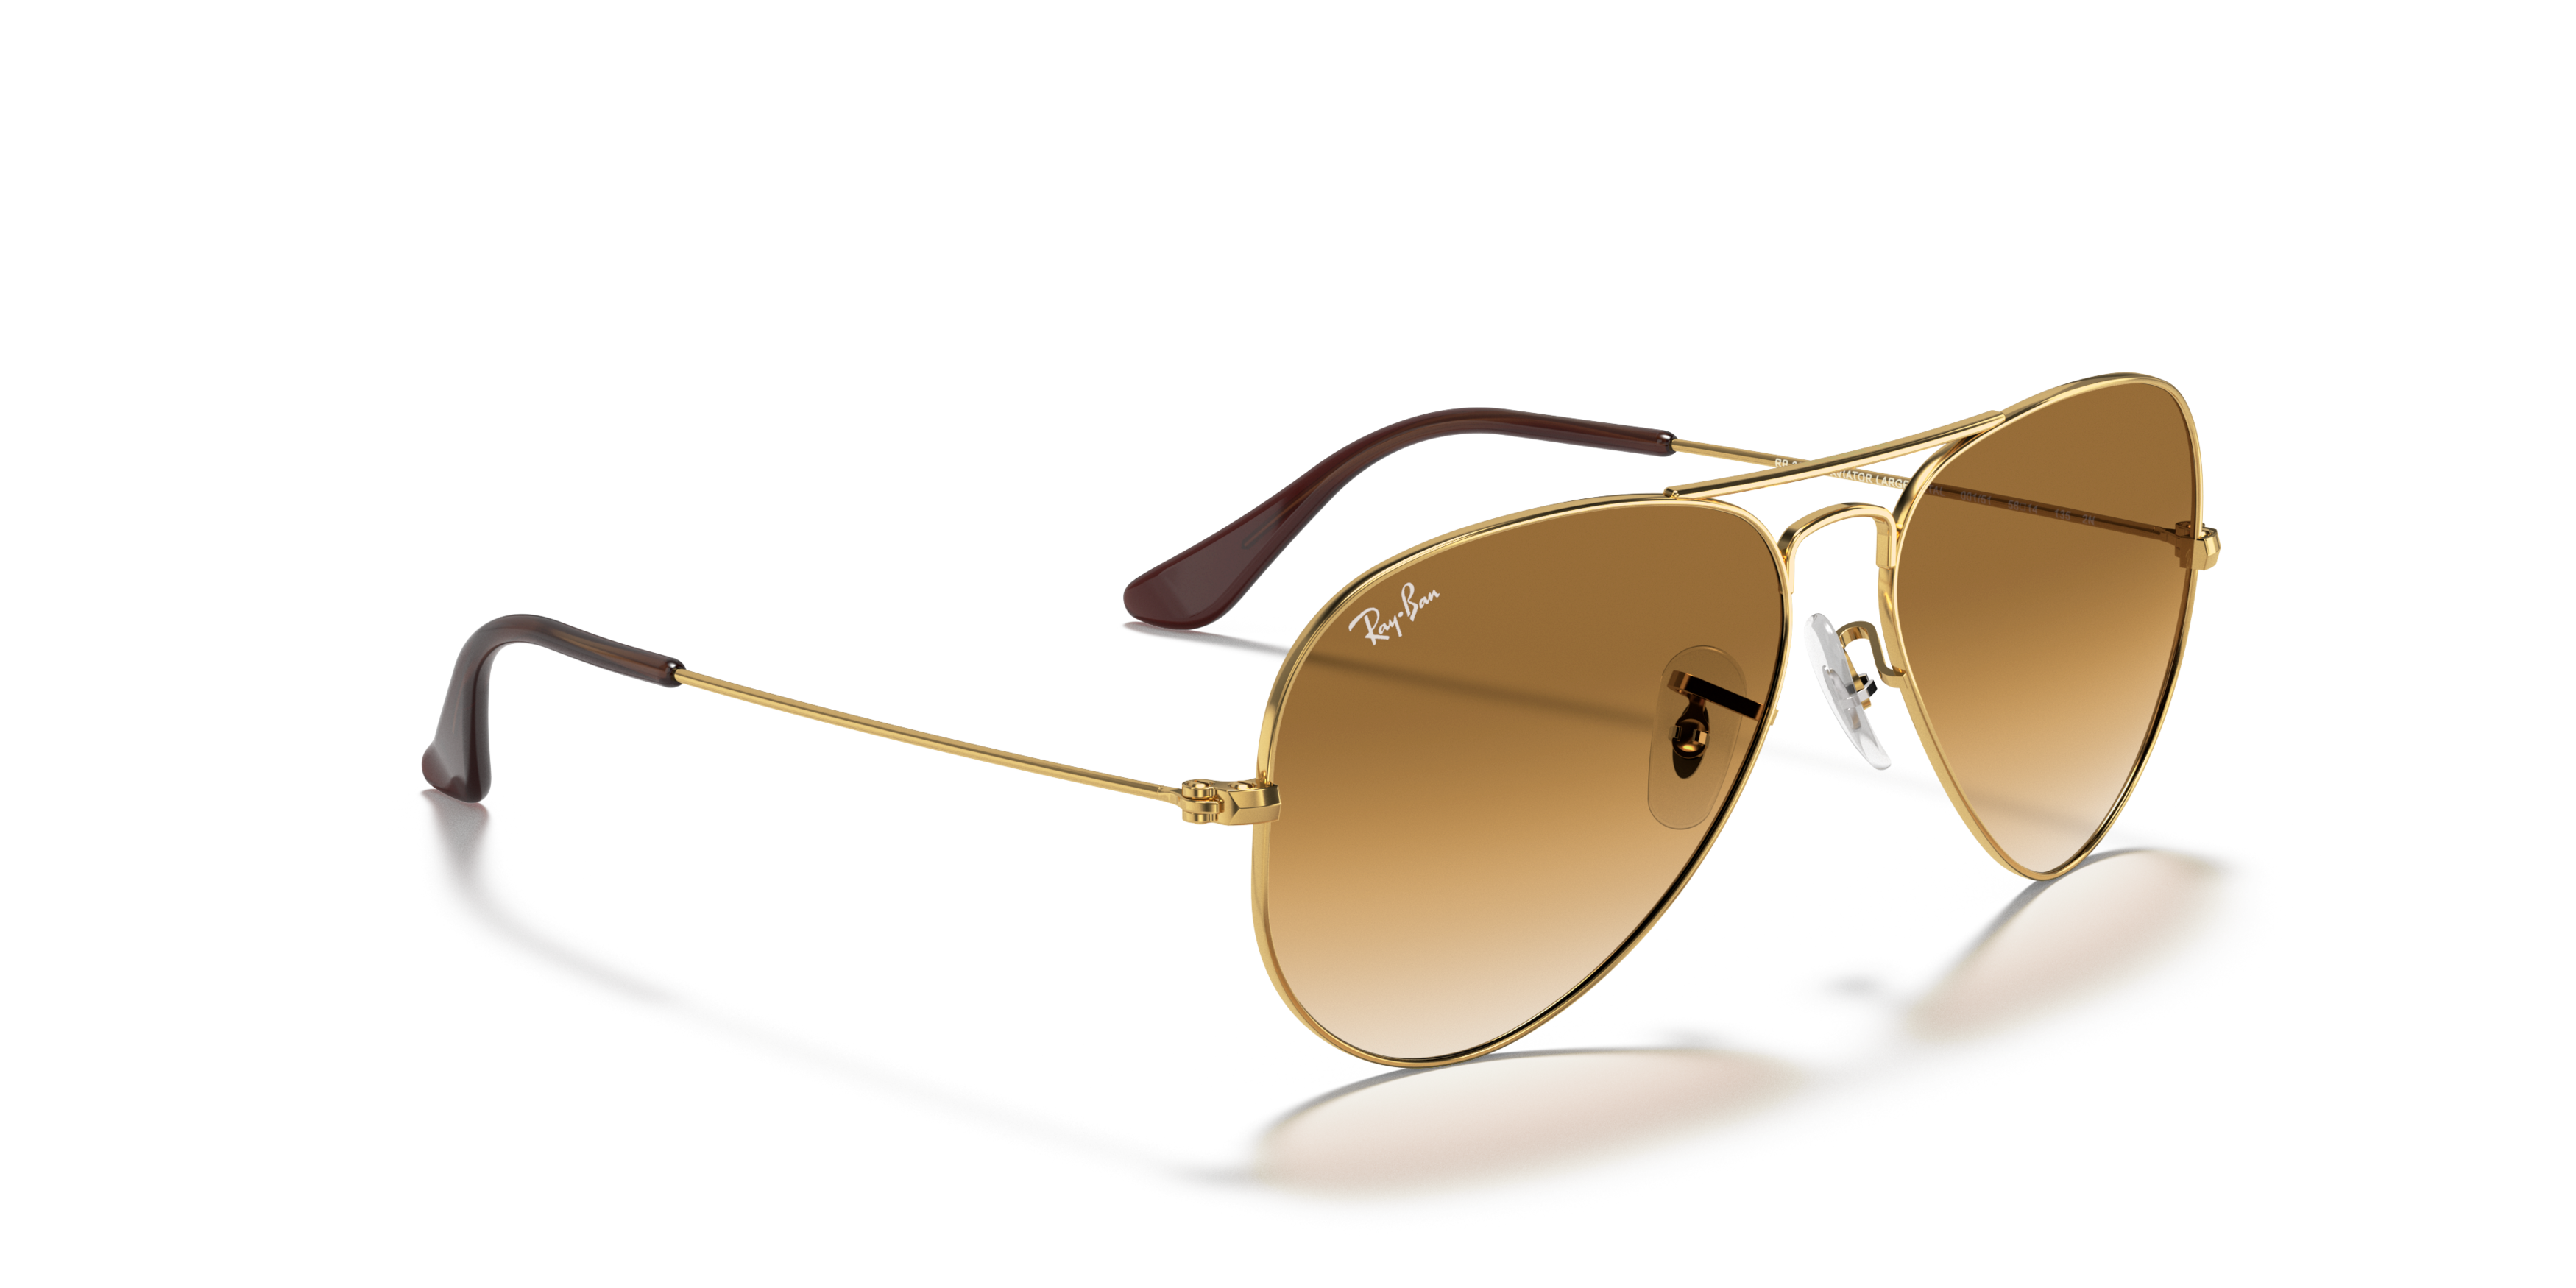 Angle_Right01 Ray-Ban Aviator RB 3025 Sunglasses Brown / Gold